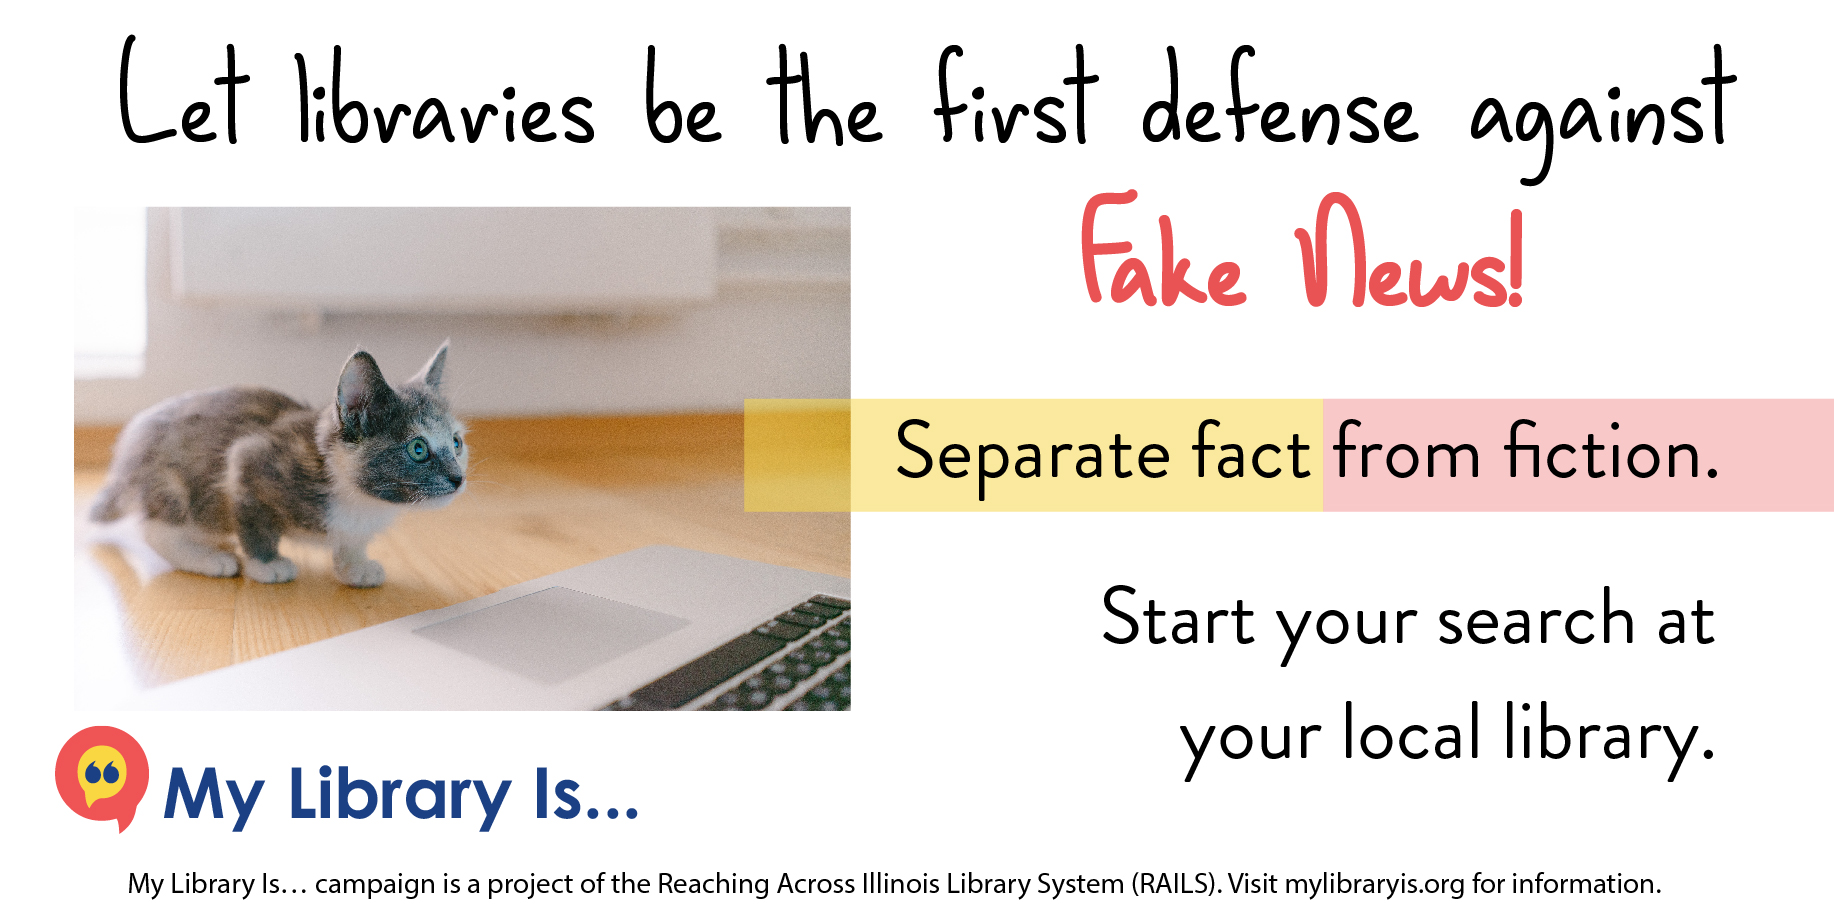 Image for Twitter. "Let libraries be the first defense against Fake News! Separate fact from fiction. Start your search at your local library." Footer provides mylibraryis.org URL.